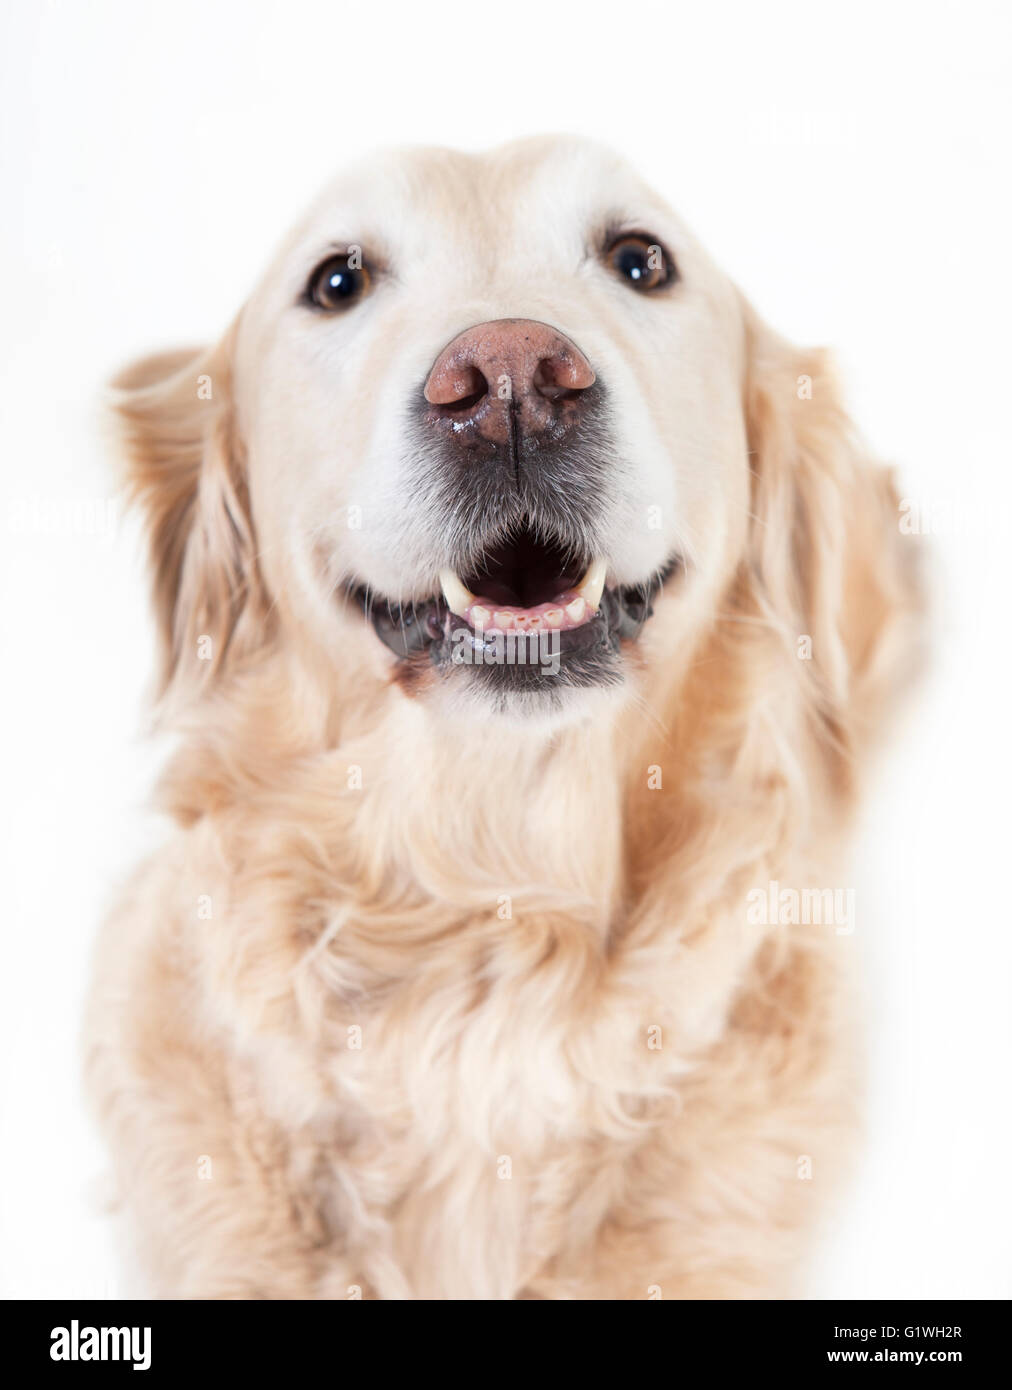 a golden retriever dog looking with open mouth at the camera, background white, optional Stock Photo